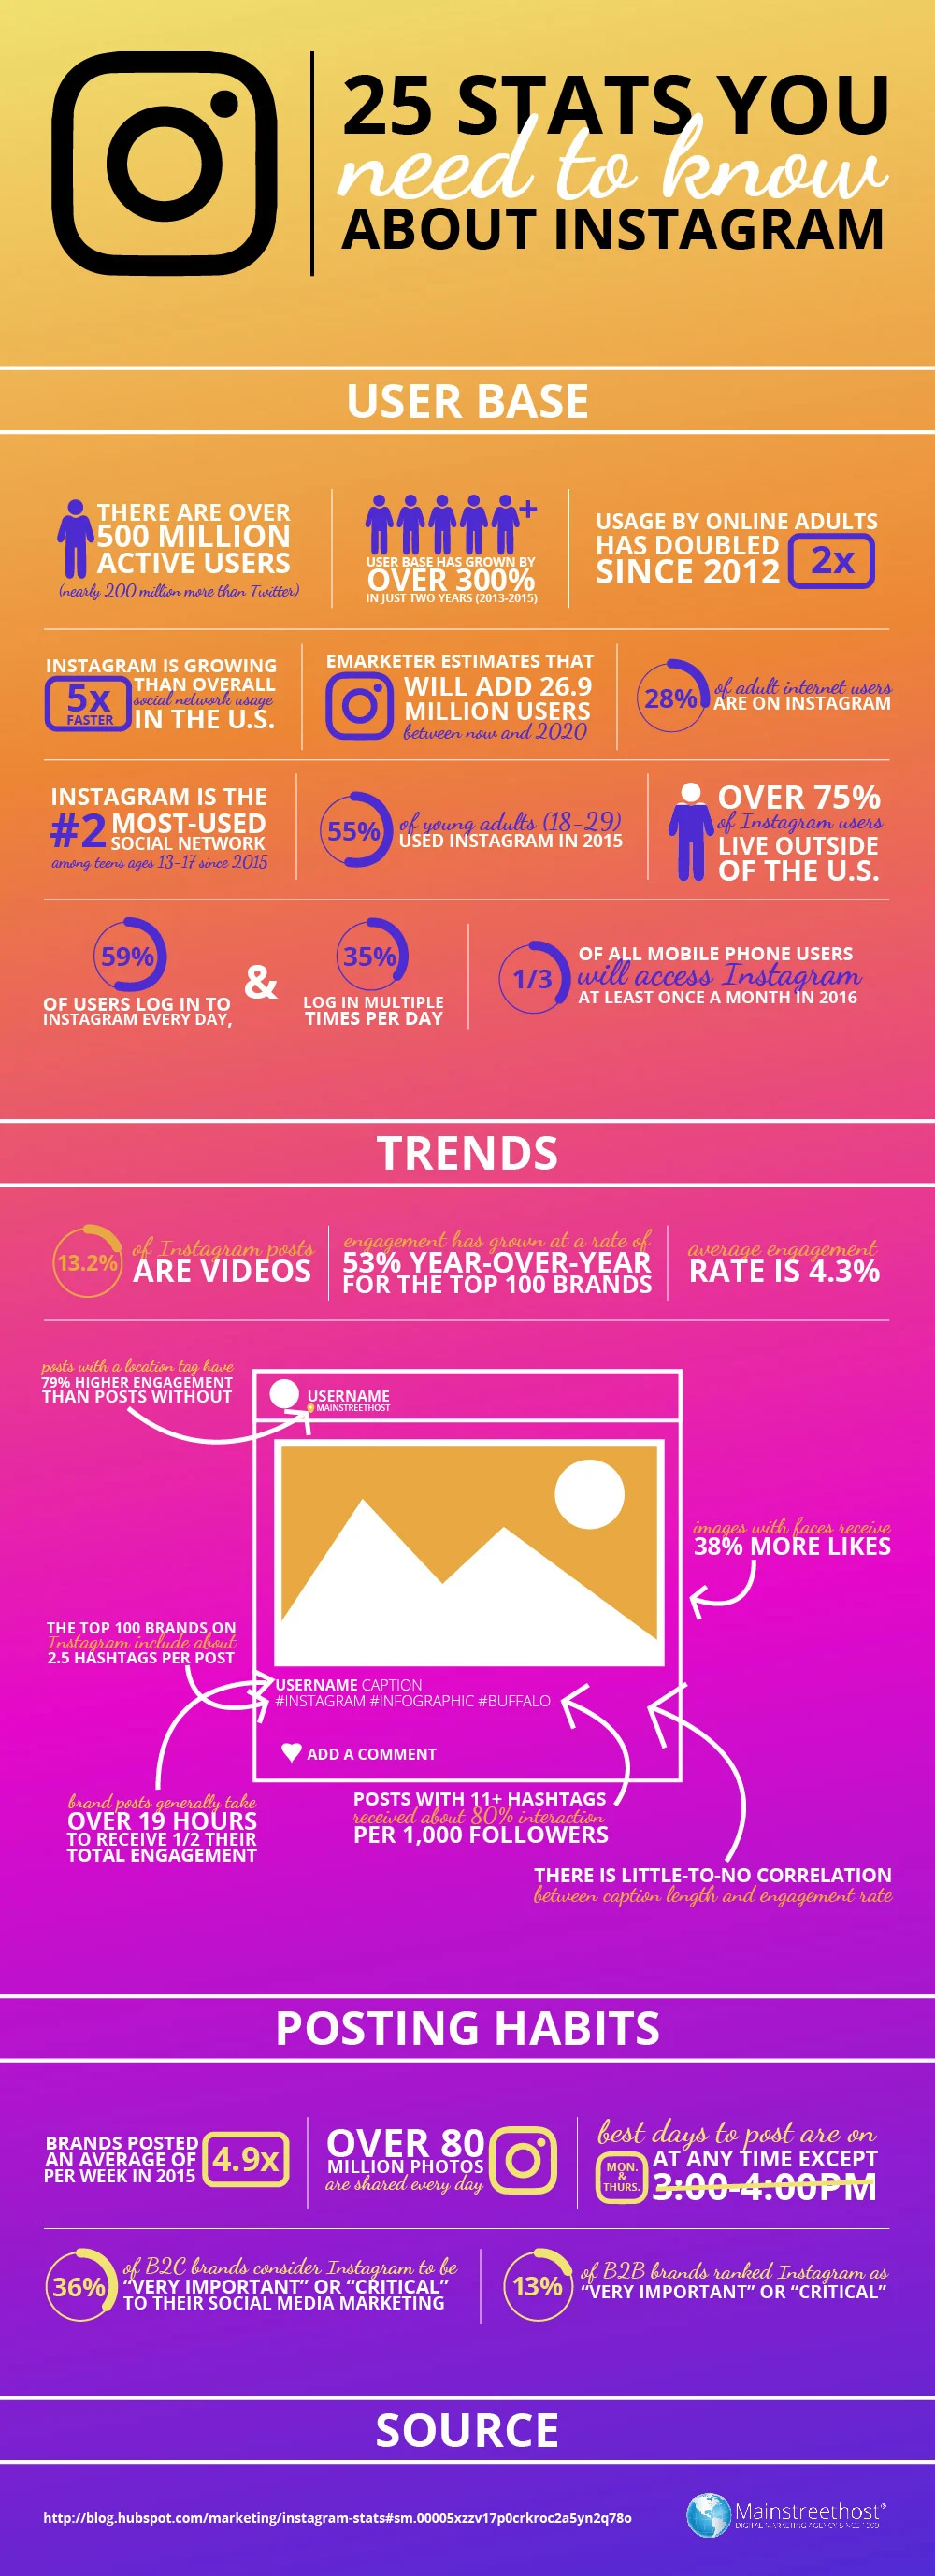 25 Stats You Need to Know About Instagram [INFOGRAPHIC]